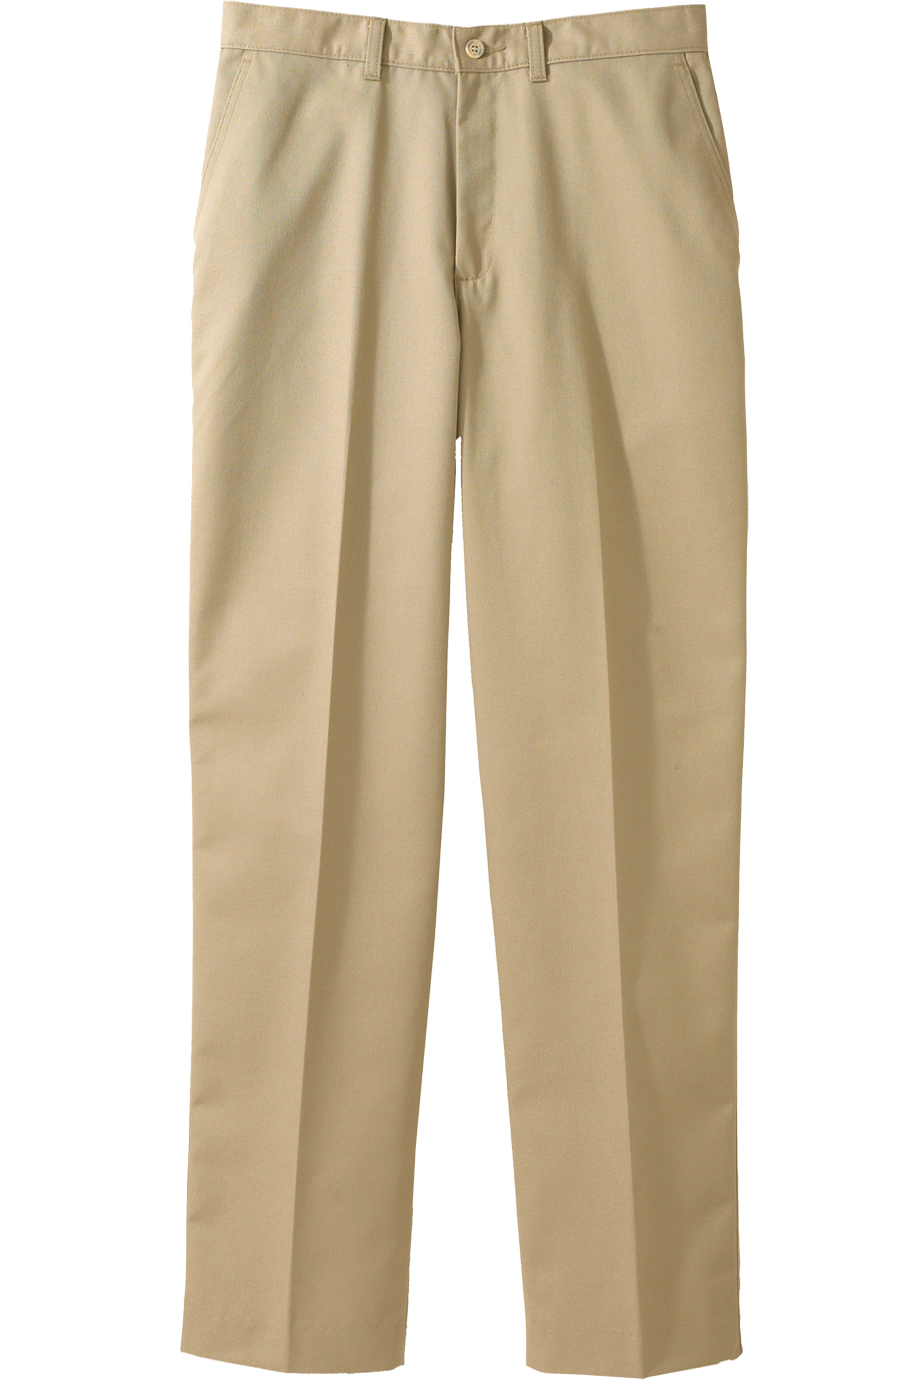 Edwards Big & Tall  Blended Chino Flat Front Pant